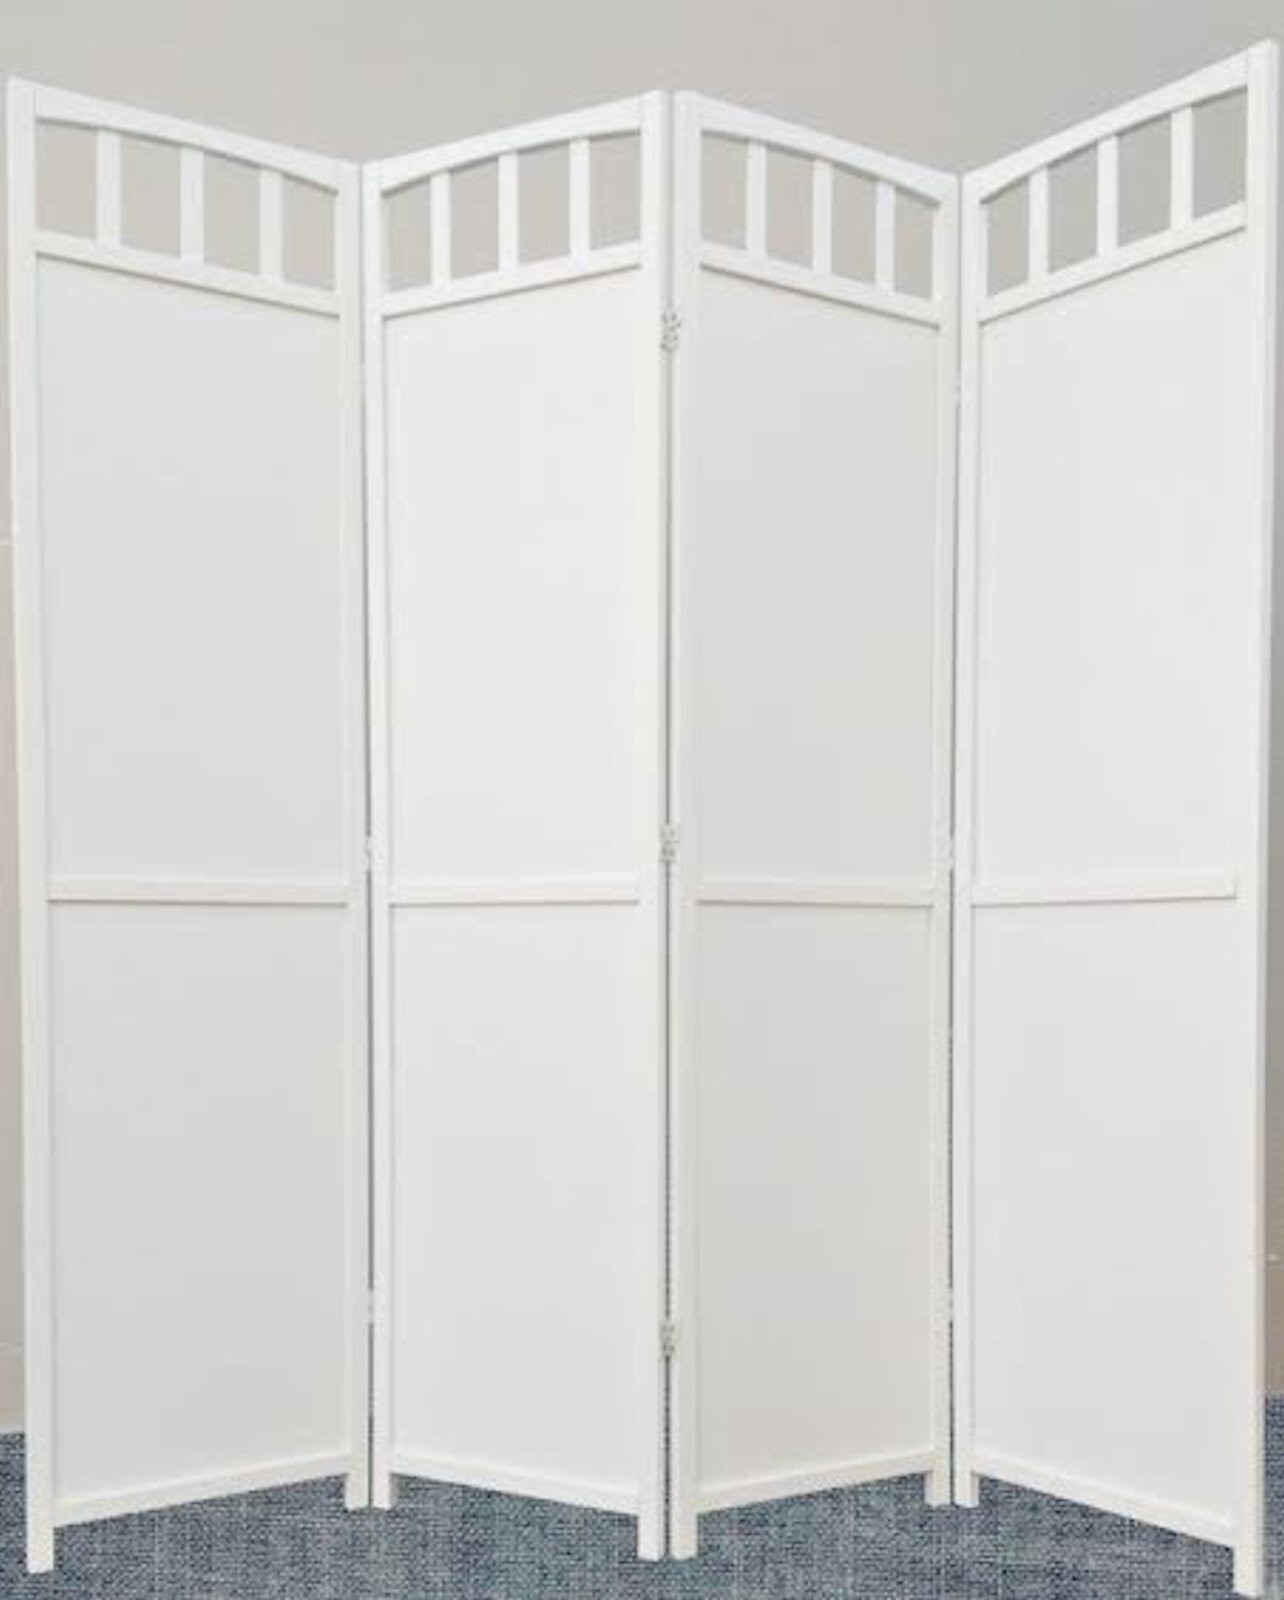 Legacy Decor 4-panel Screen Room Divider Solid Wood